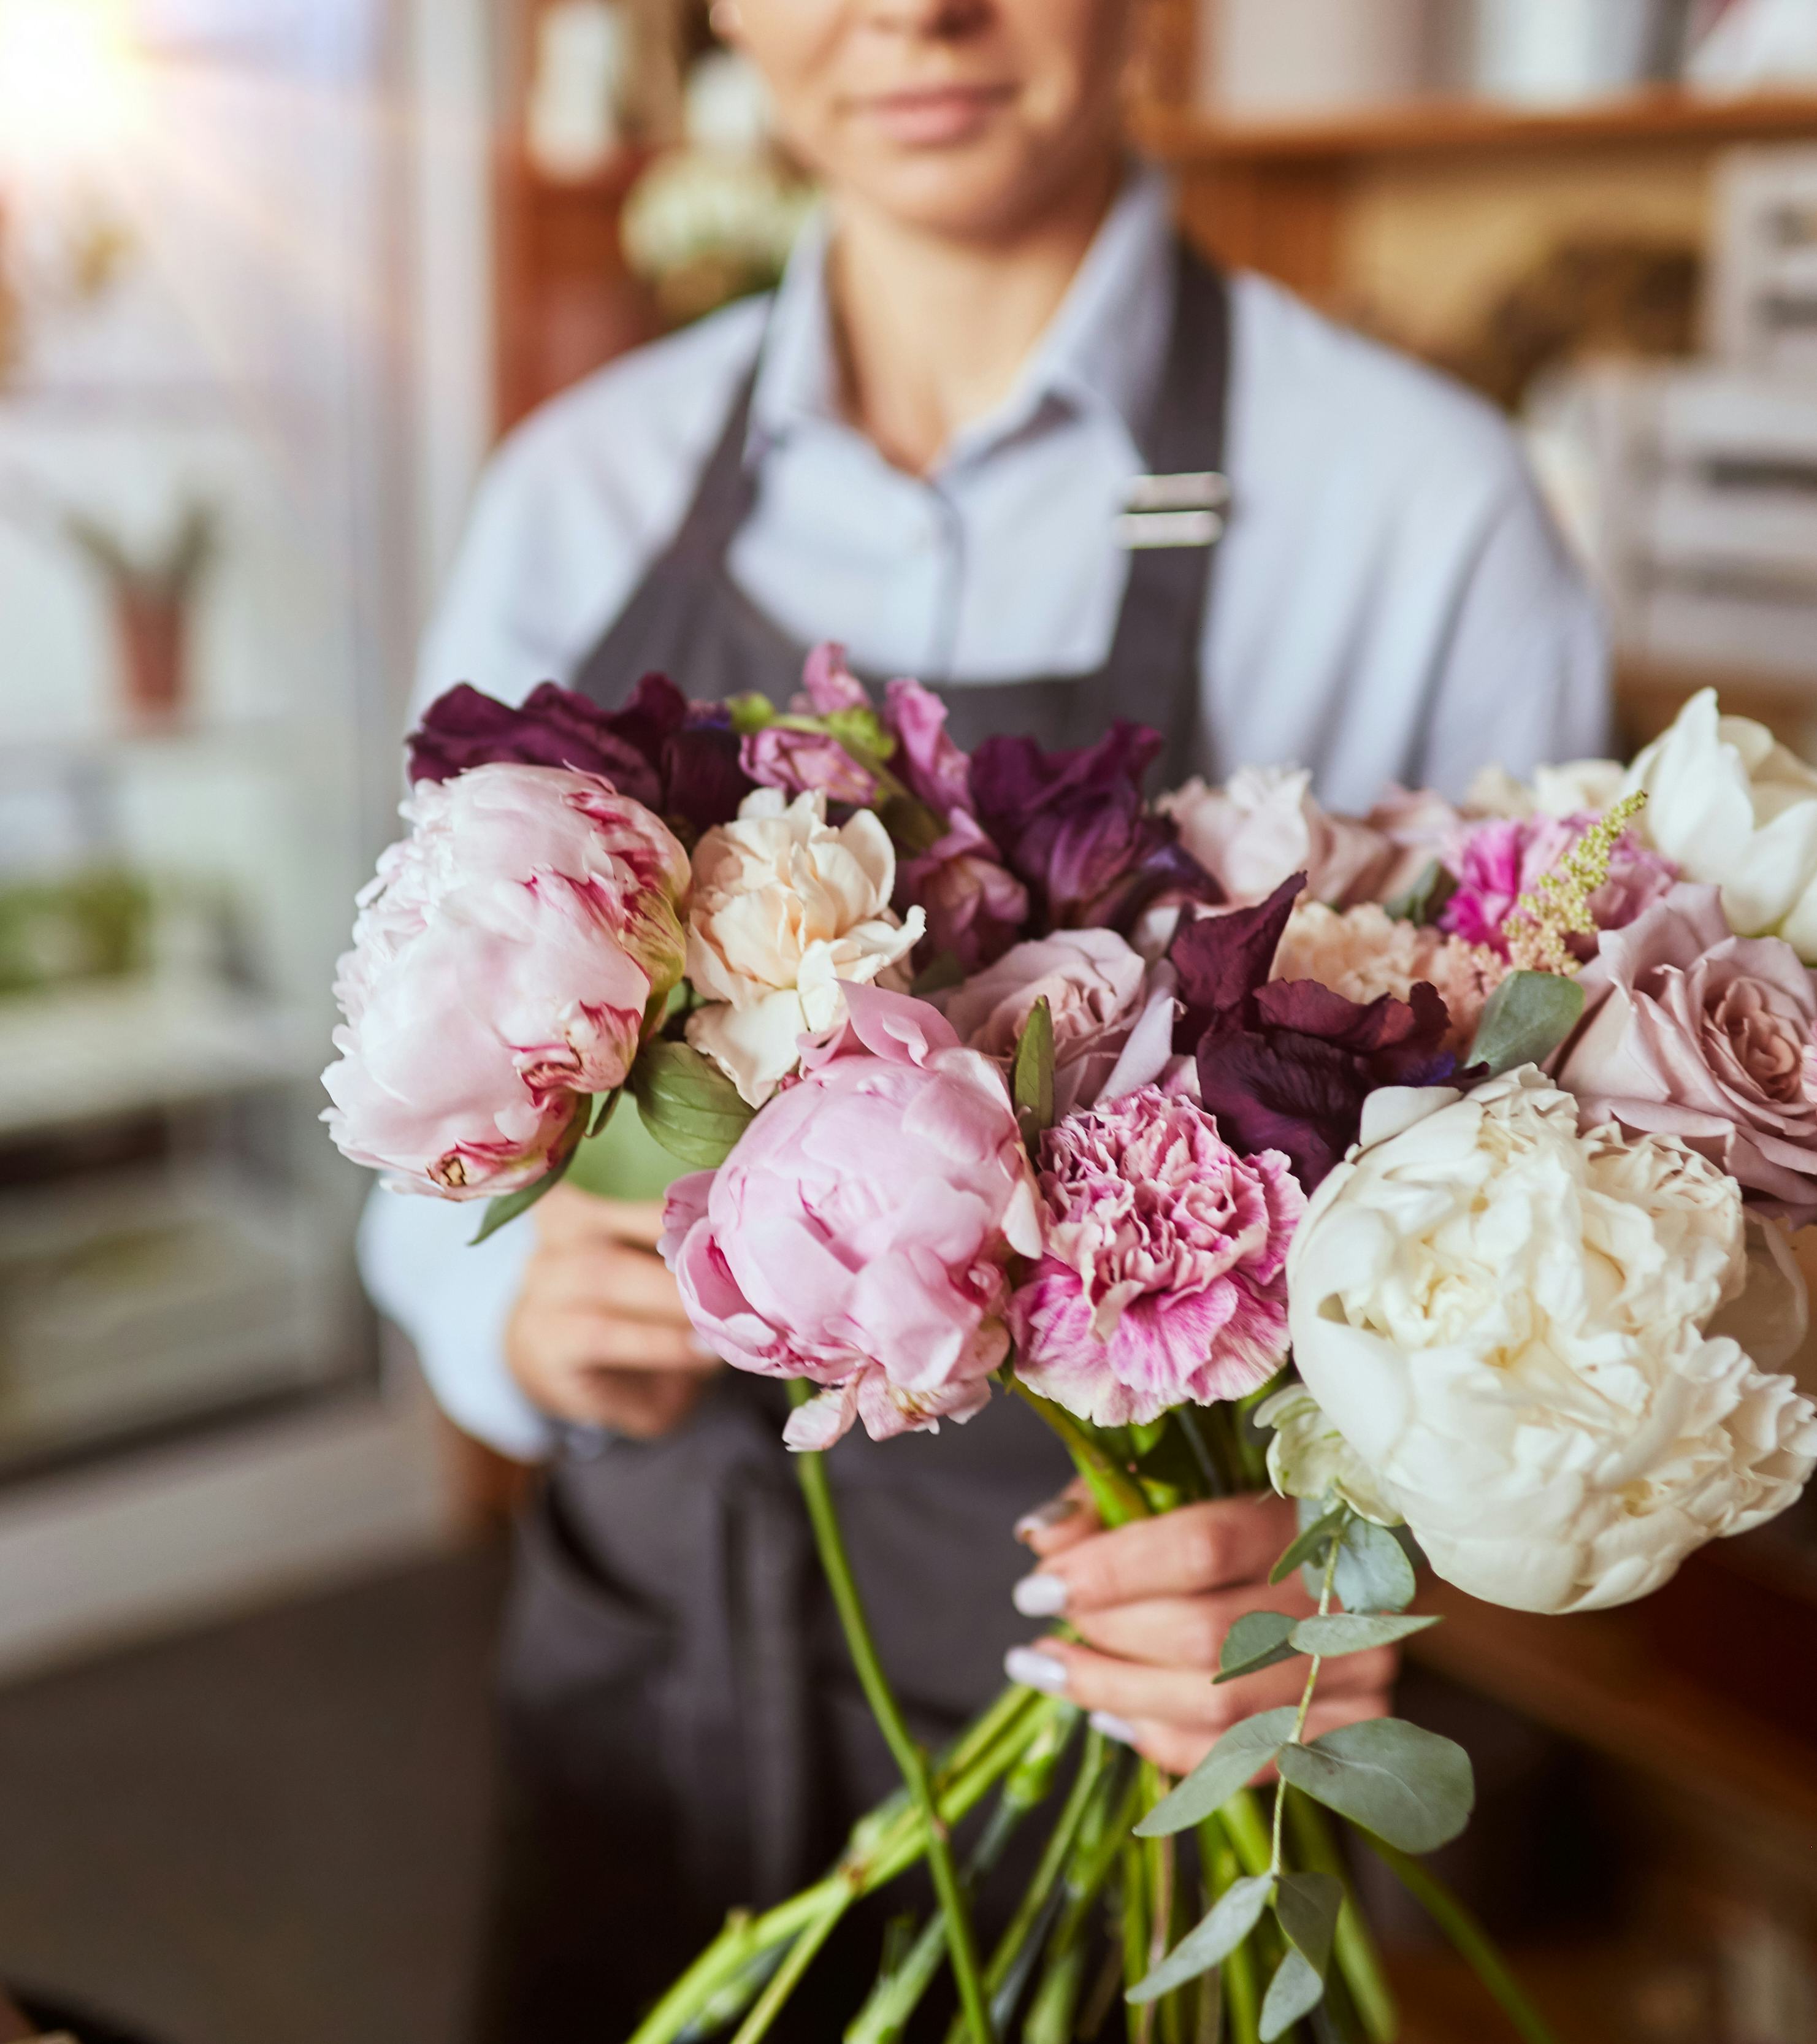 An employee in an apron is holding out a bunch of pink and white flowers, including roses.